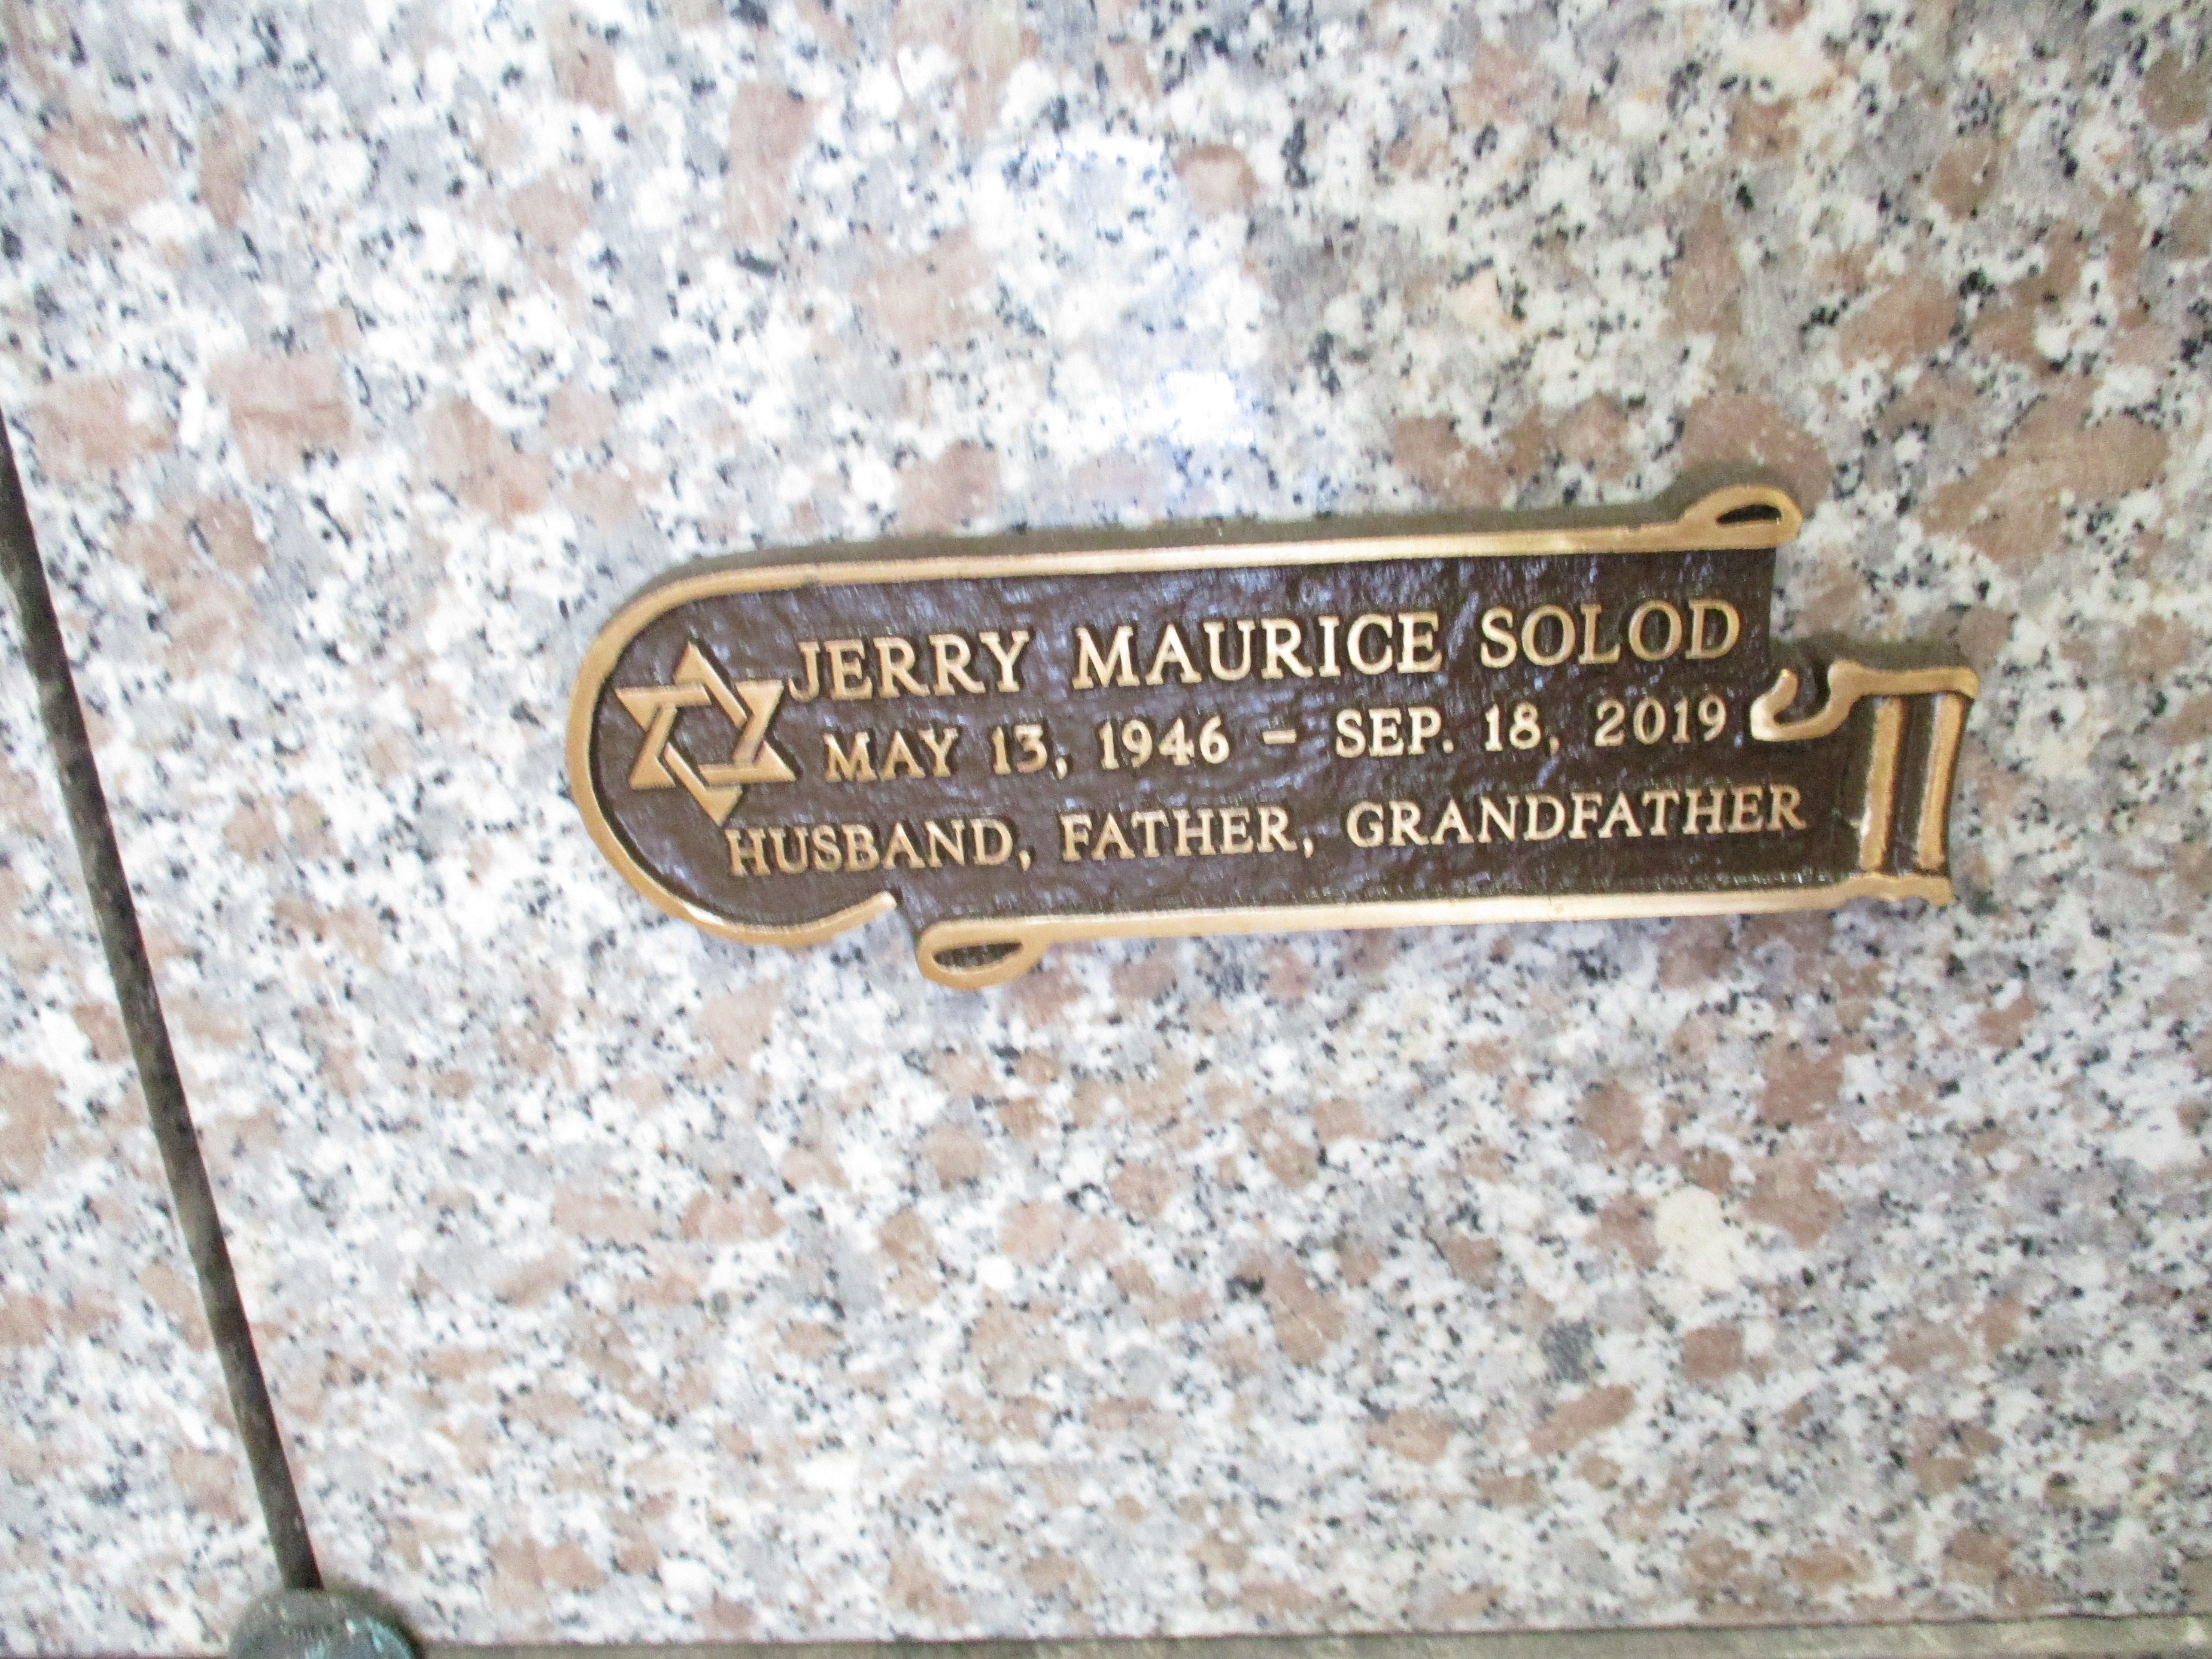 Jerry Maurice Solod